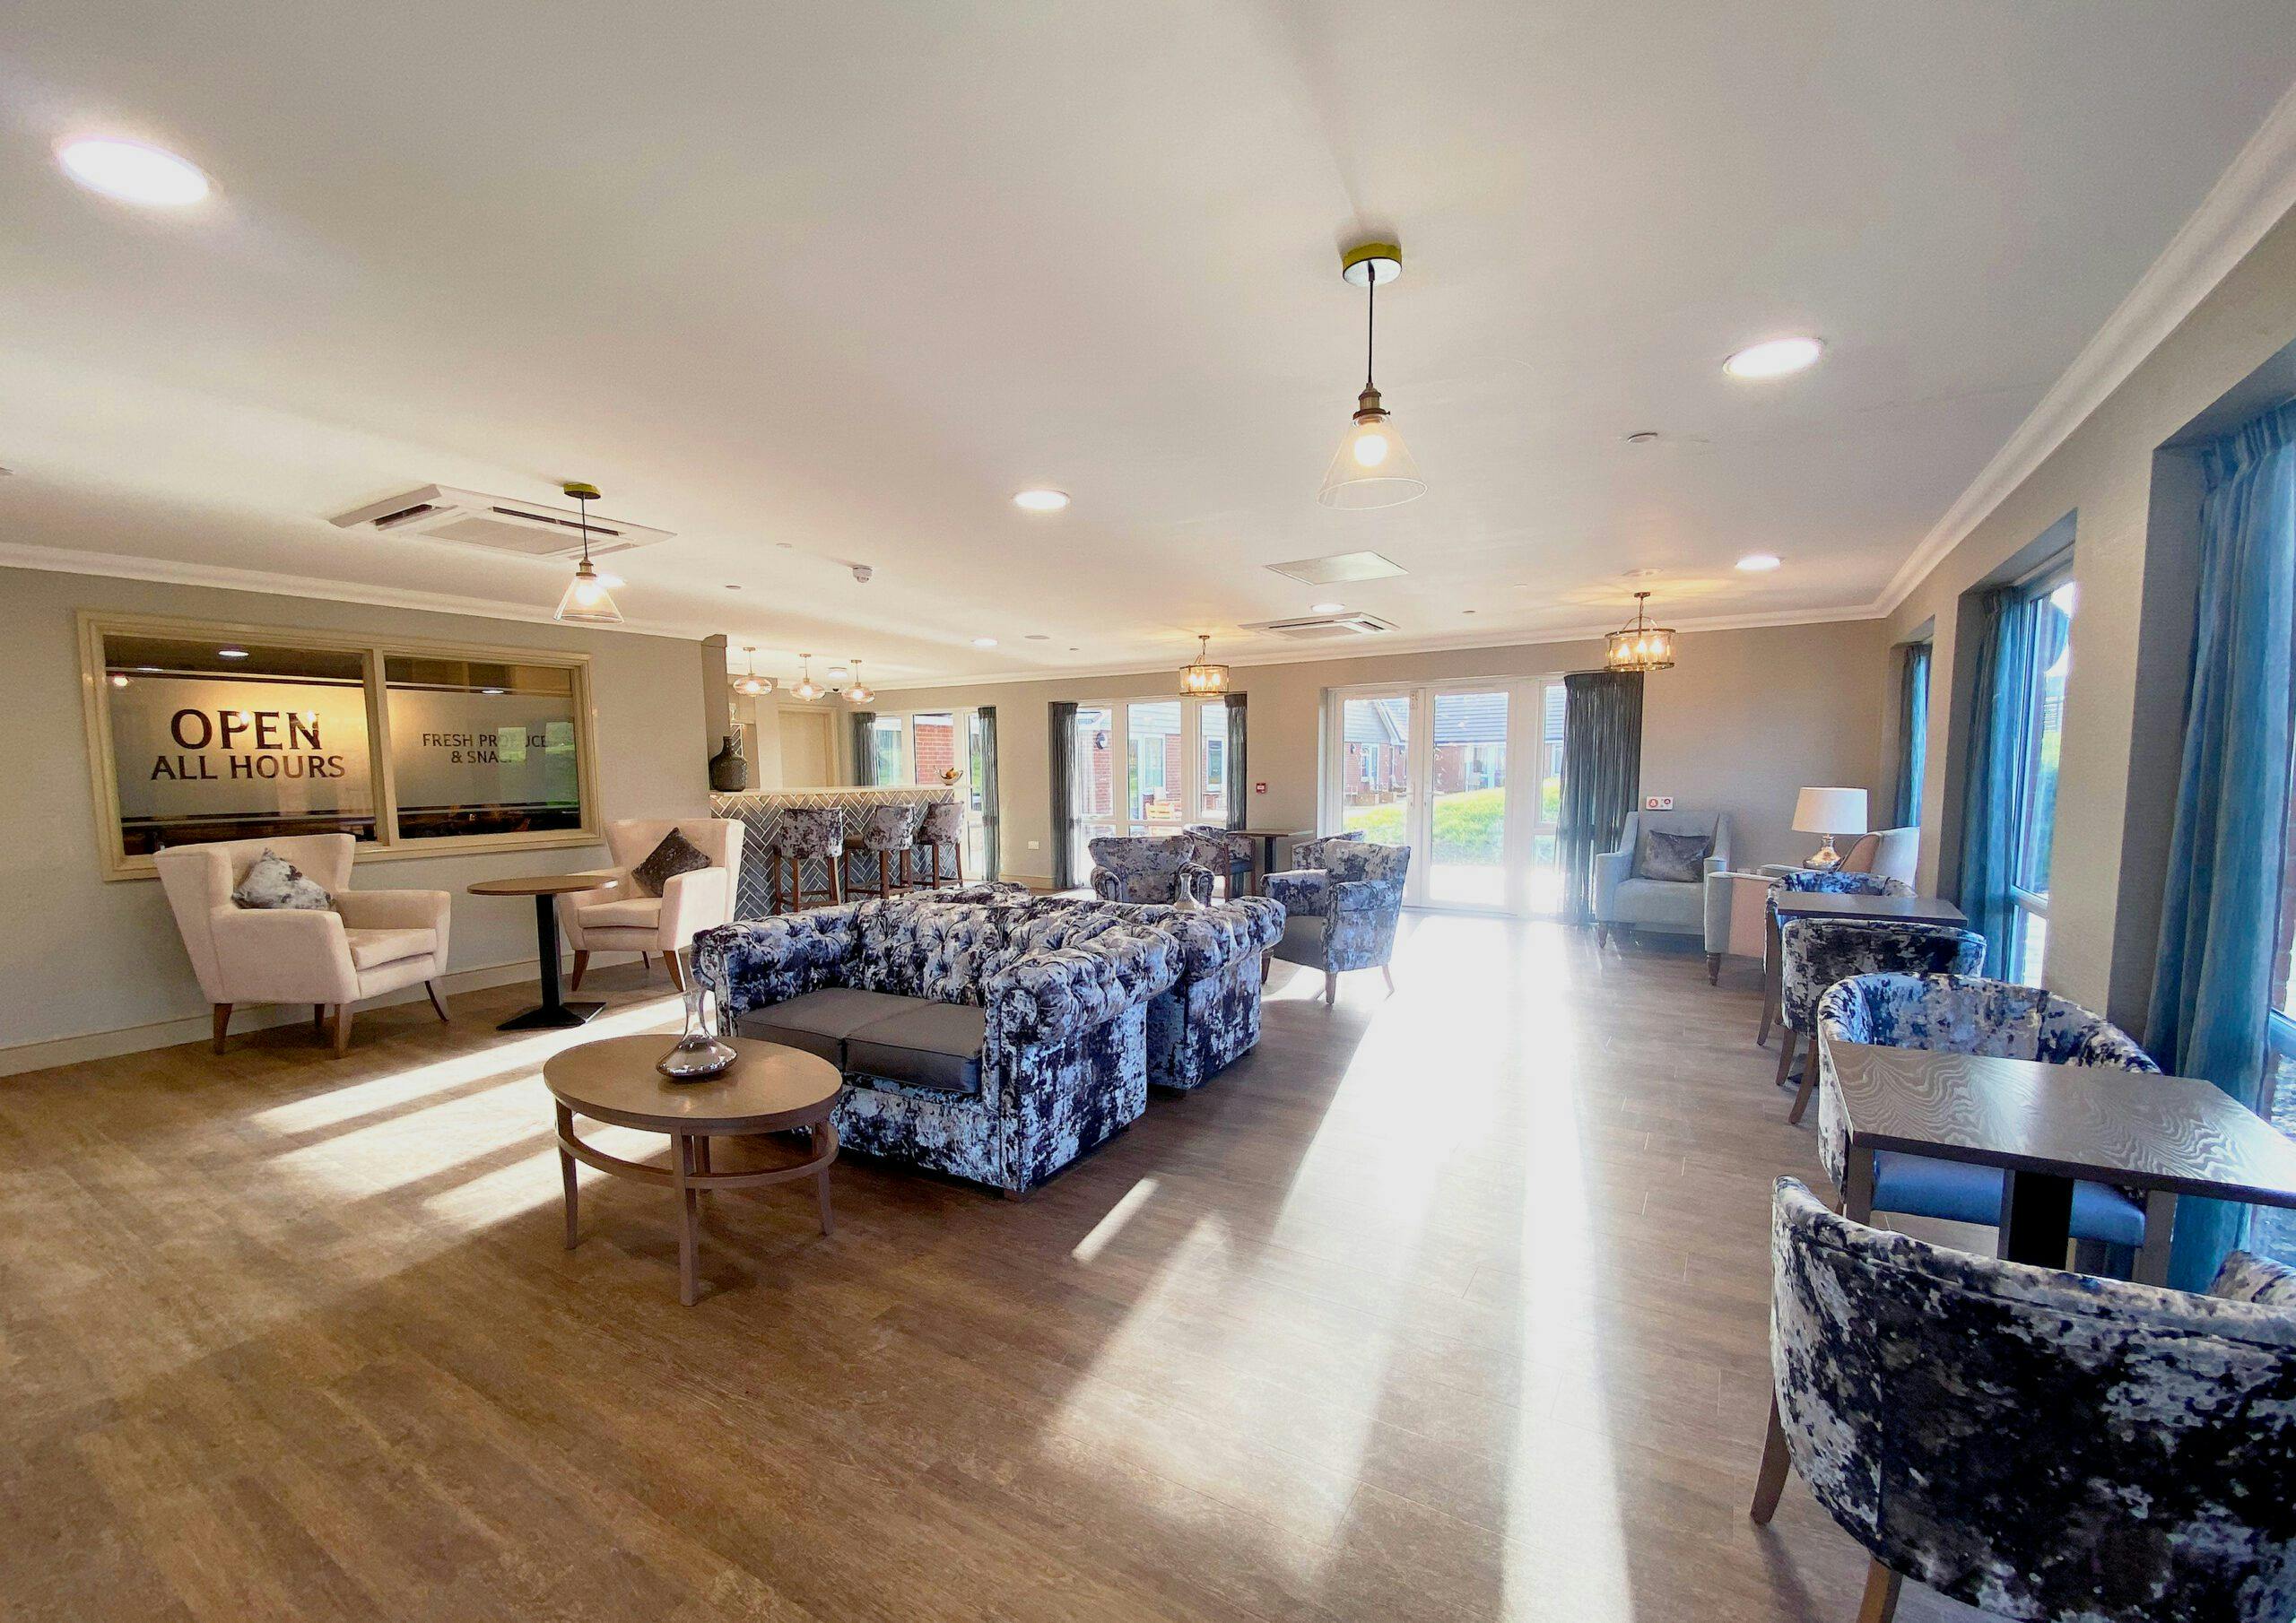 Lounge of Thimbleby Court care home in Horncastle, Lincolnshire